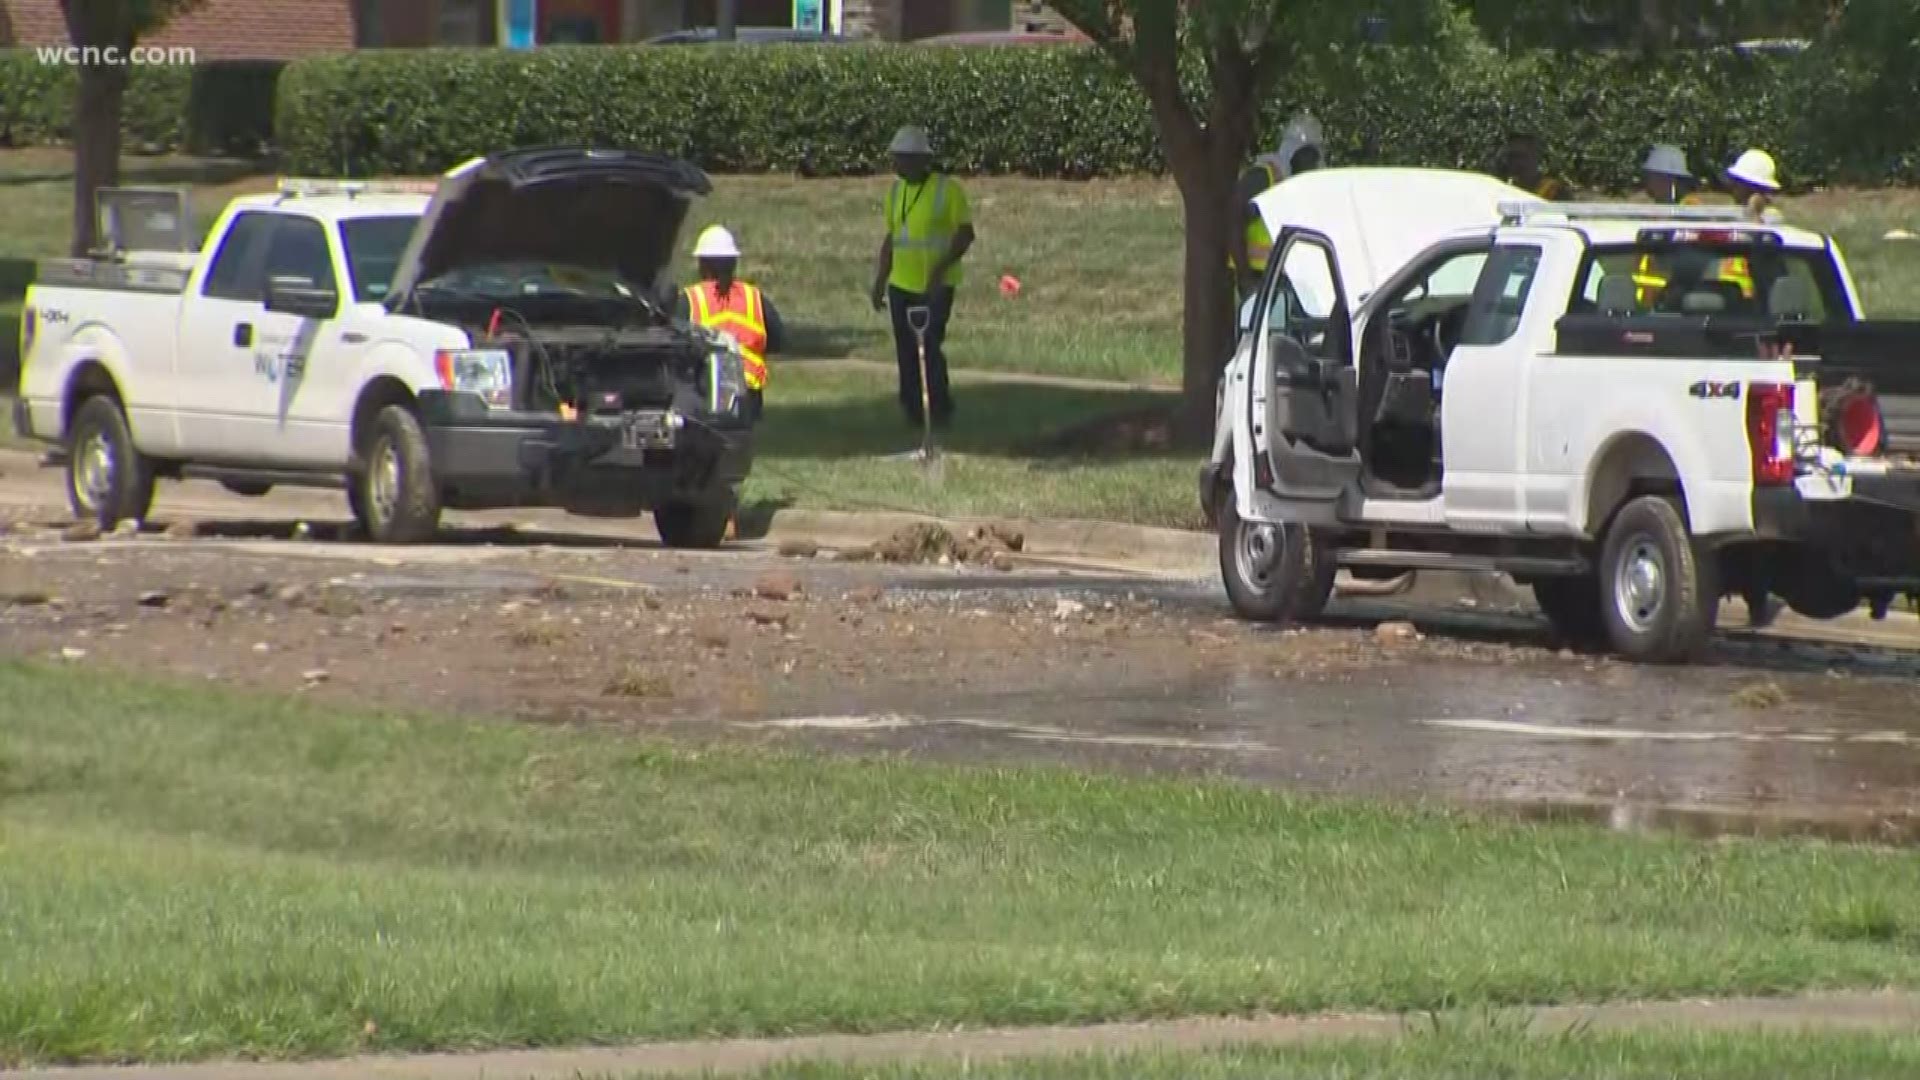 Crews are working to repair a broken water main in Ballantyne in the area of Rea Road and Ardrey Kell Road.